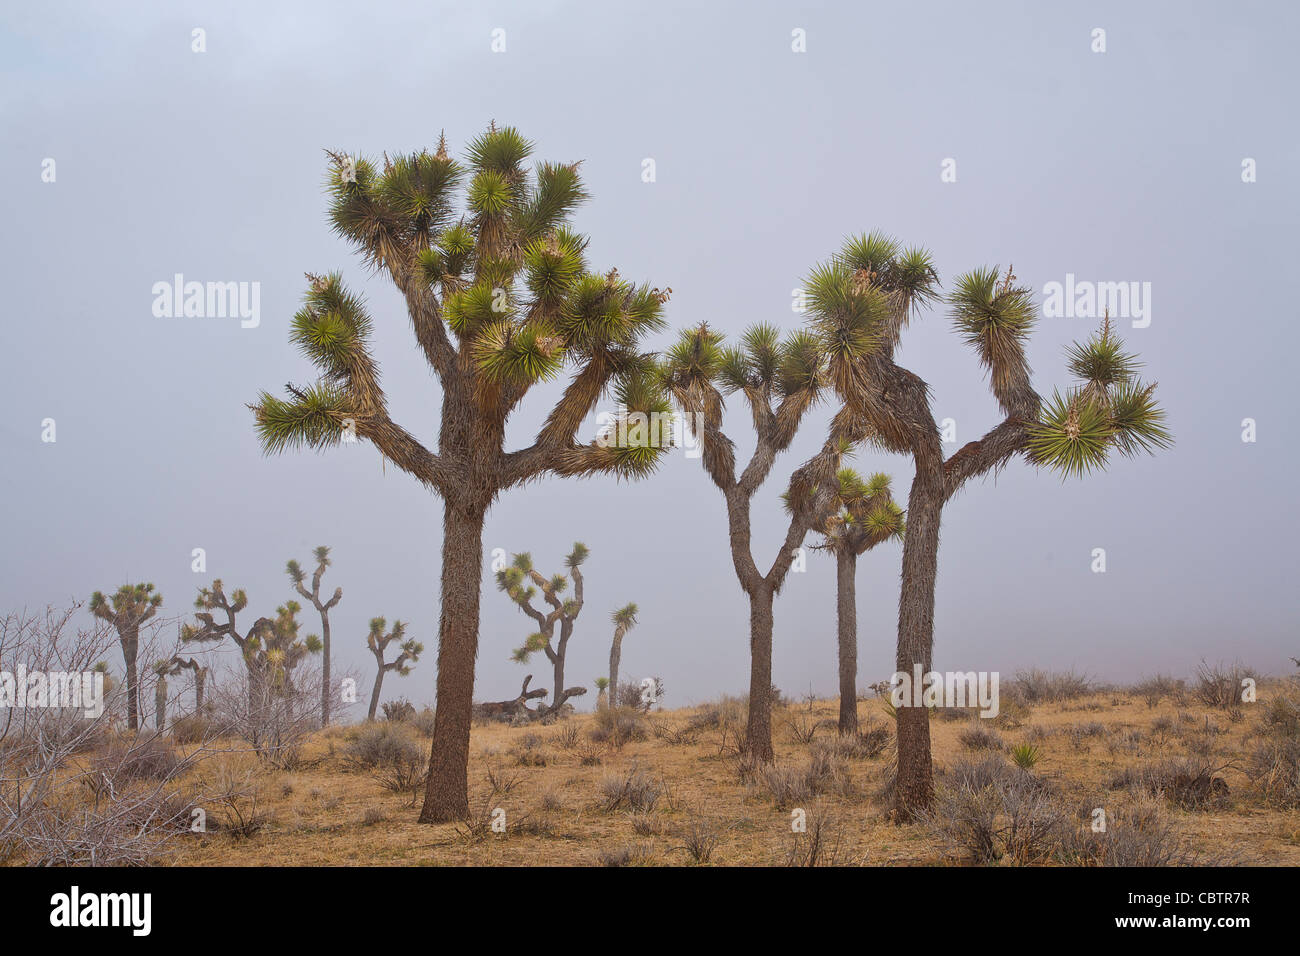 Joshua Trees stands against the clouds and the desert landscape in Joshua Tree National Park, California. Stock Photo